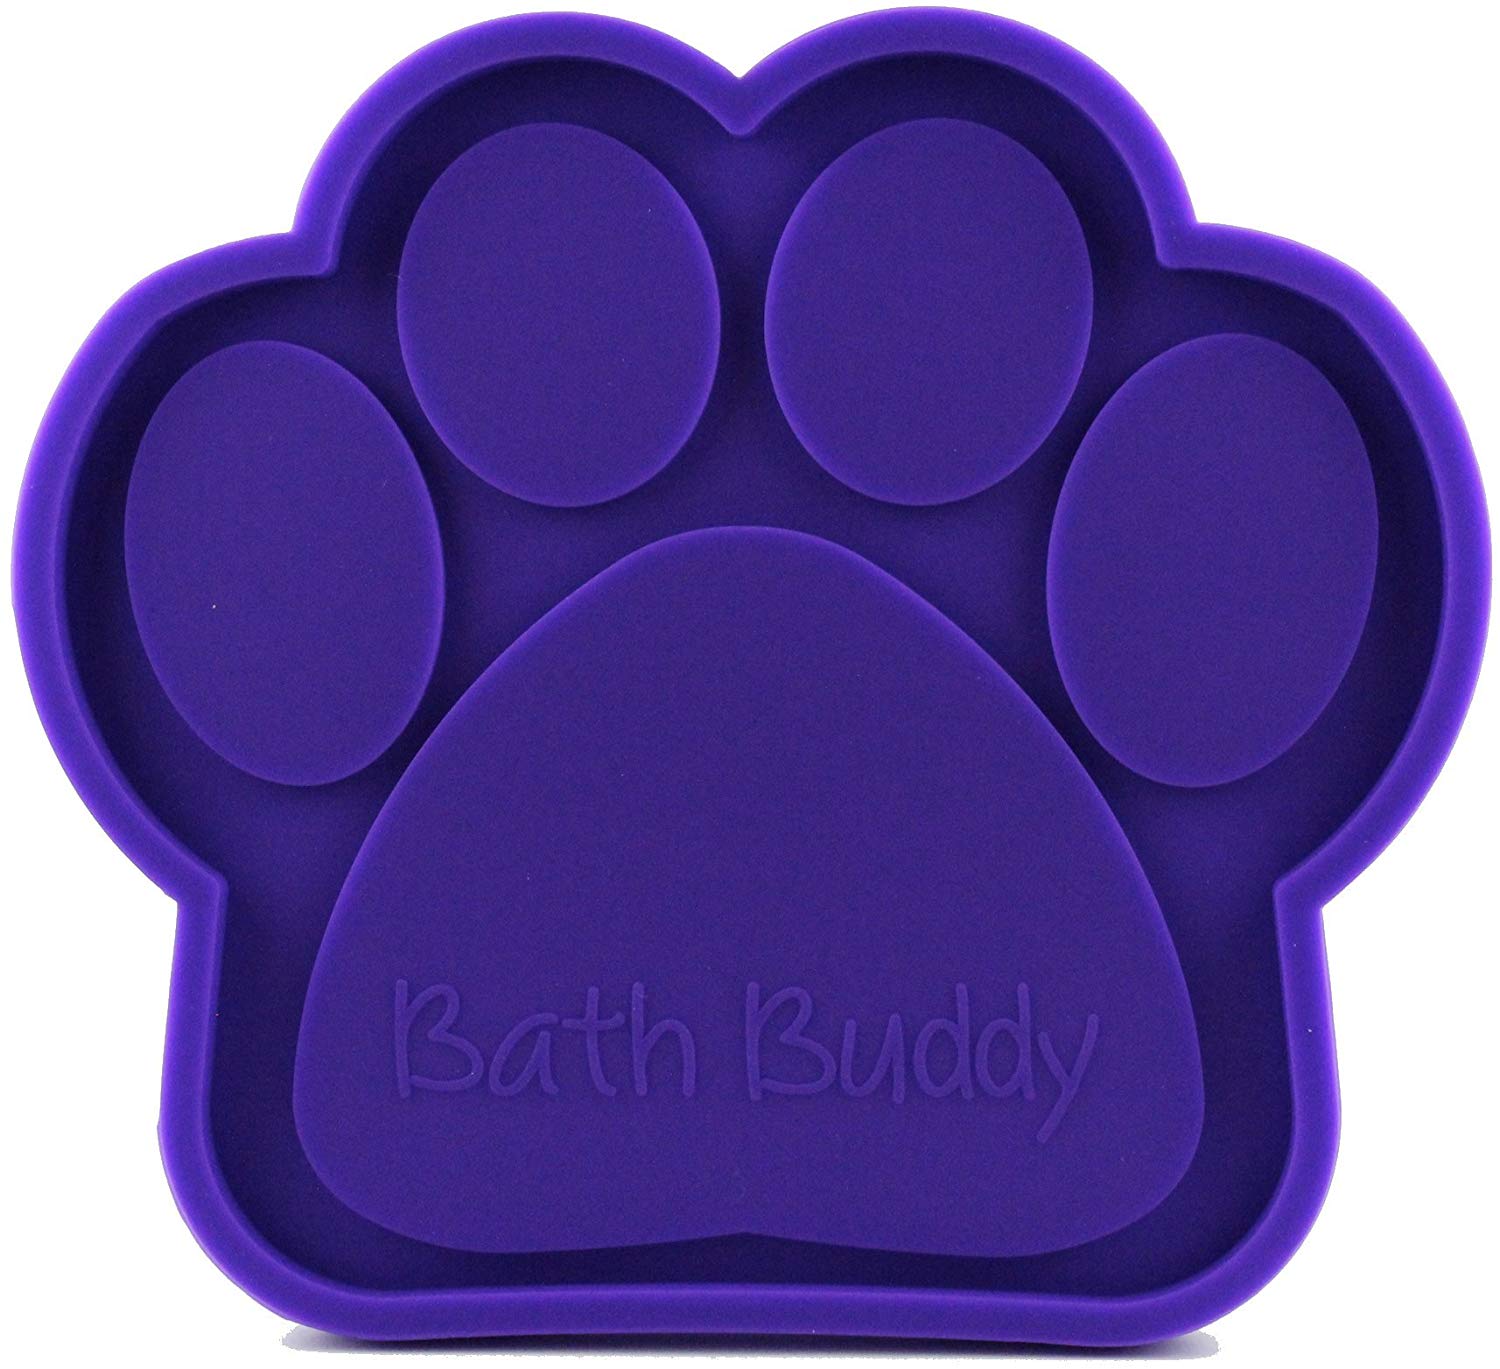 Bath Buddy for Dogs - The Original Dog Bath Toy - Makes Bath Time Easy, Just Spread Peanut Butter and Stick